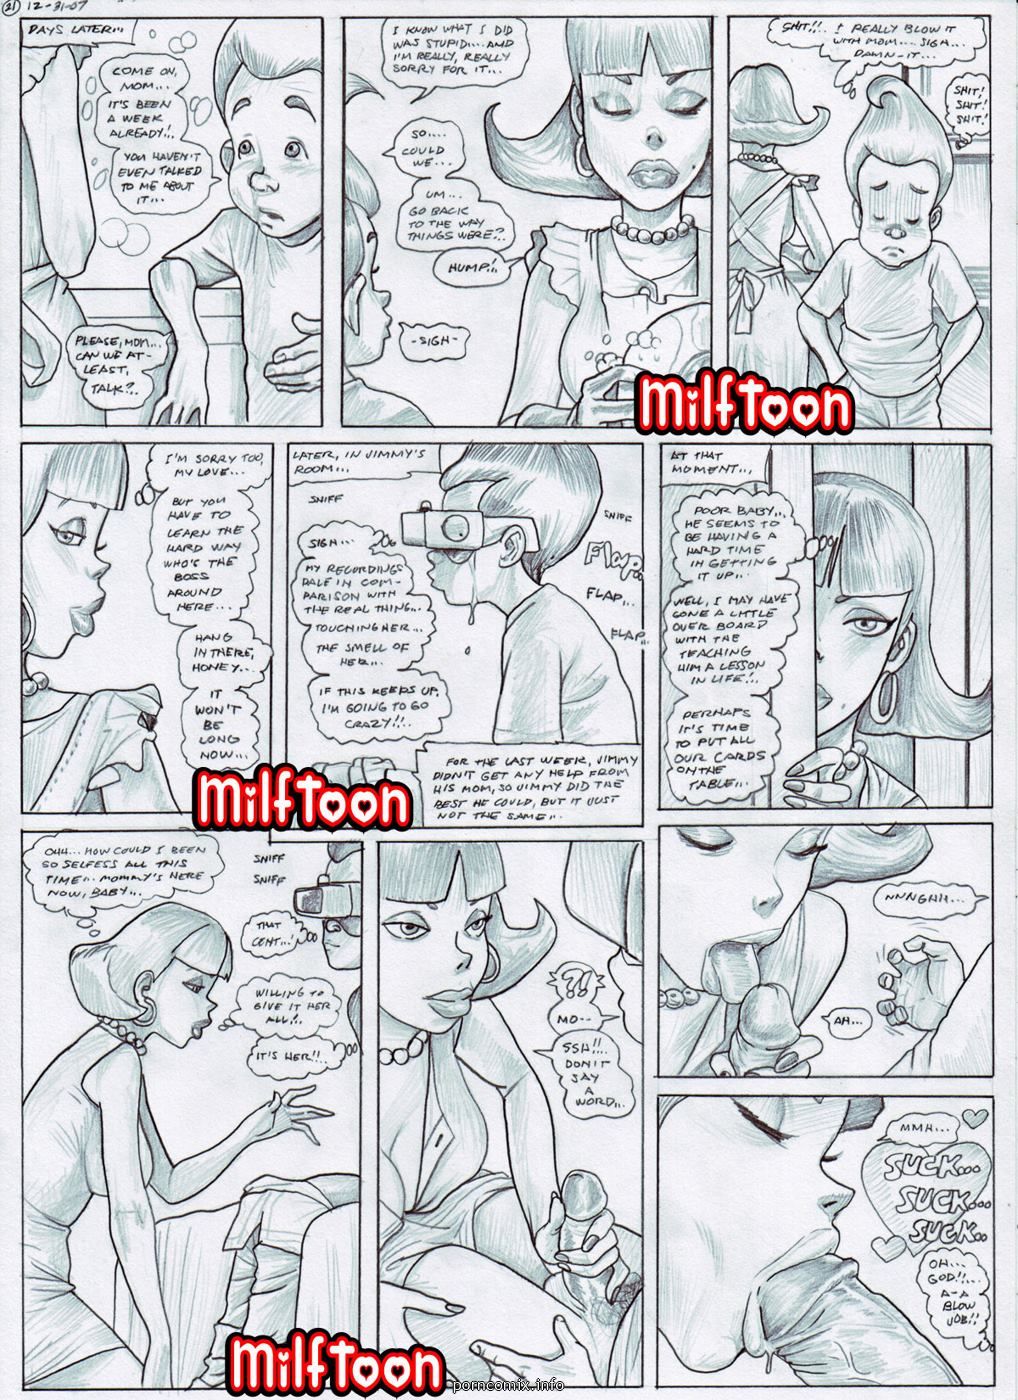 Milftoon - Jimmy Naitron page 22